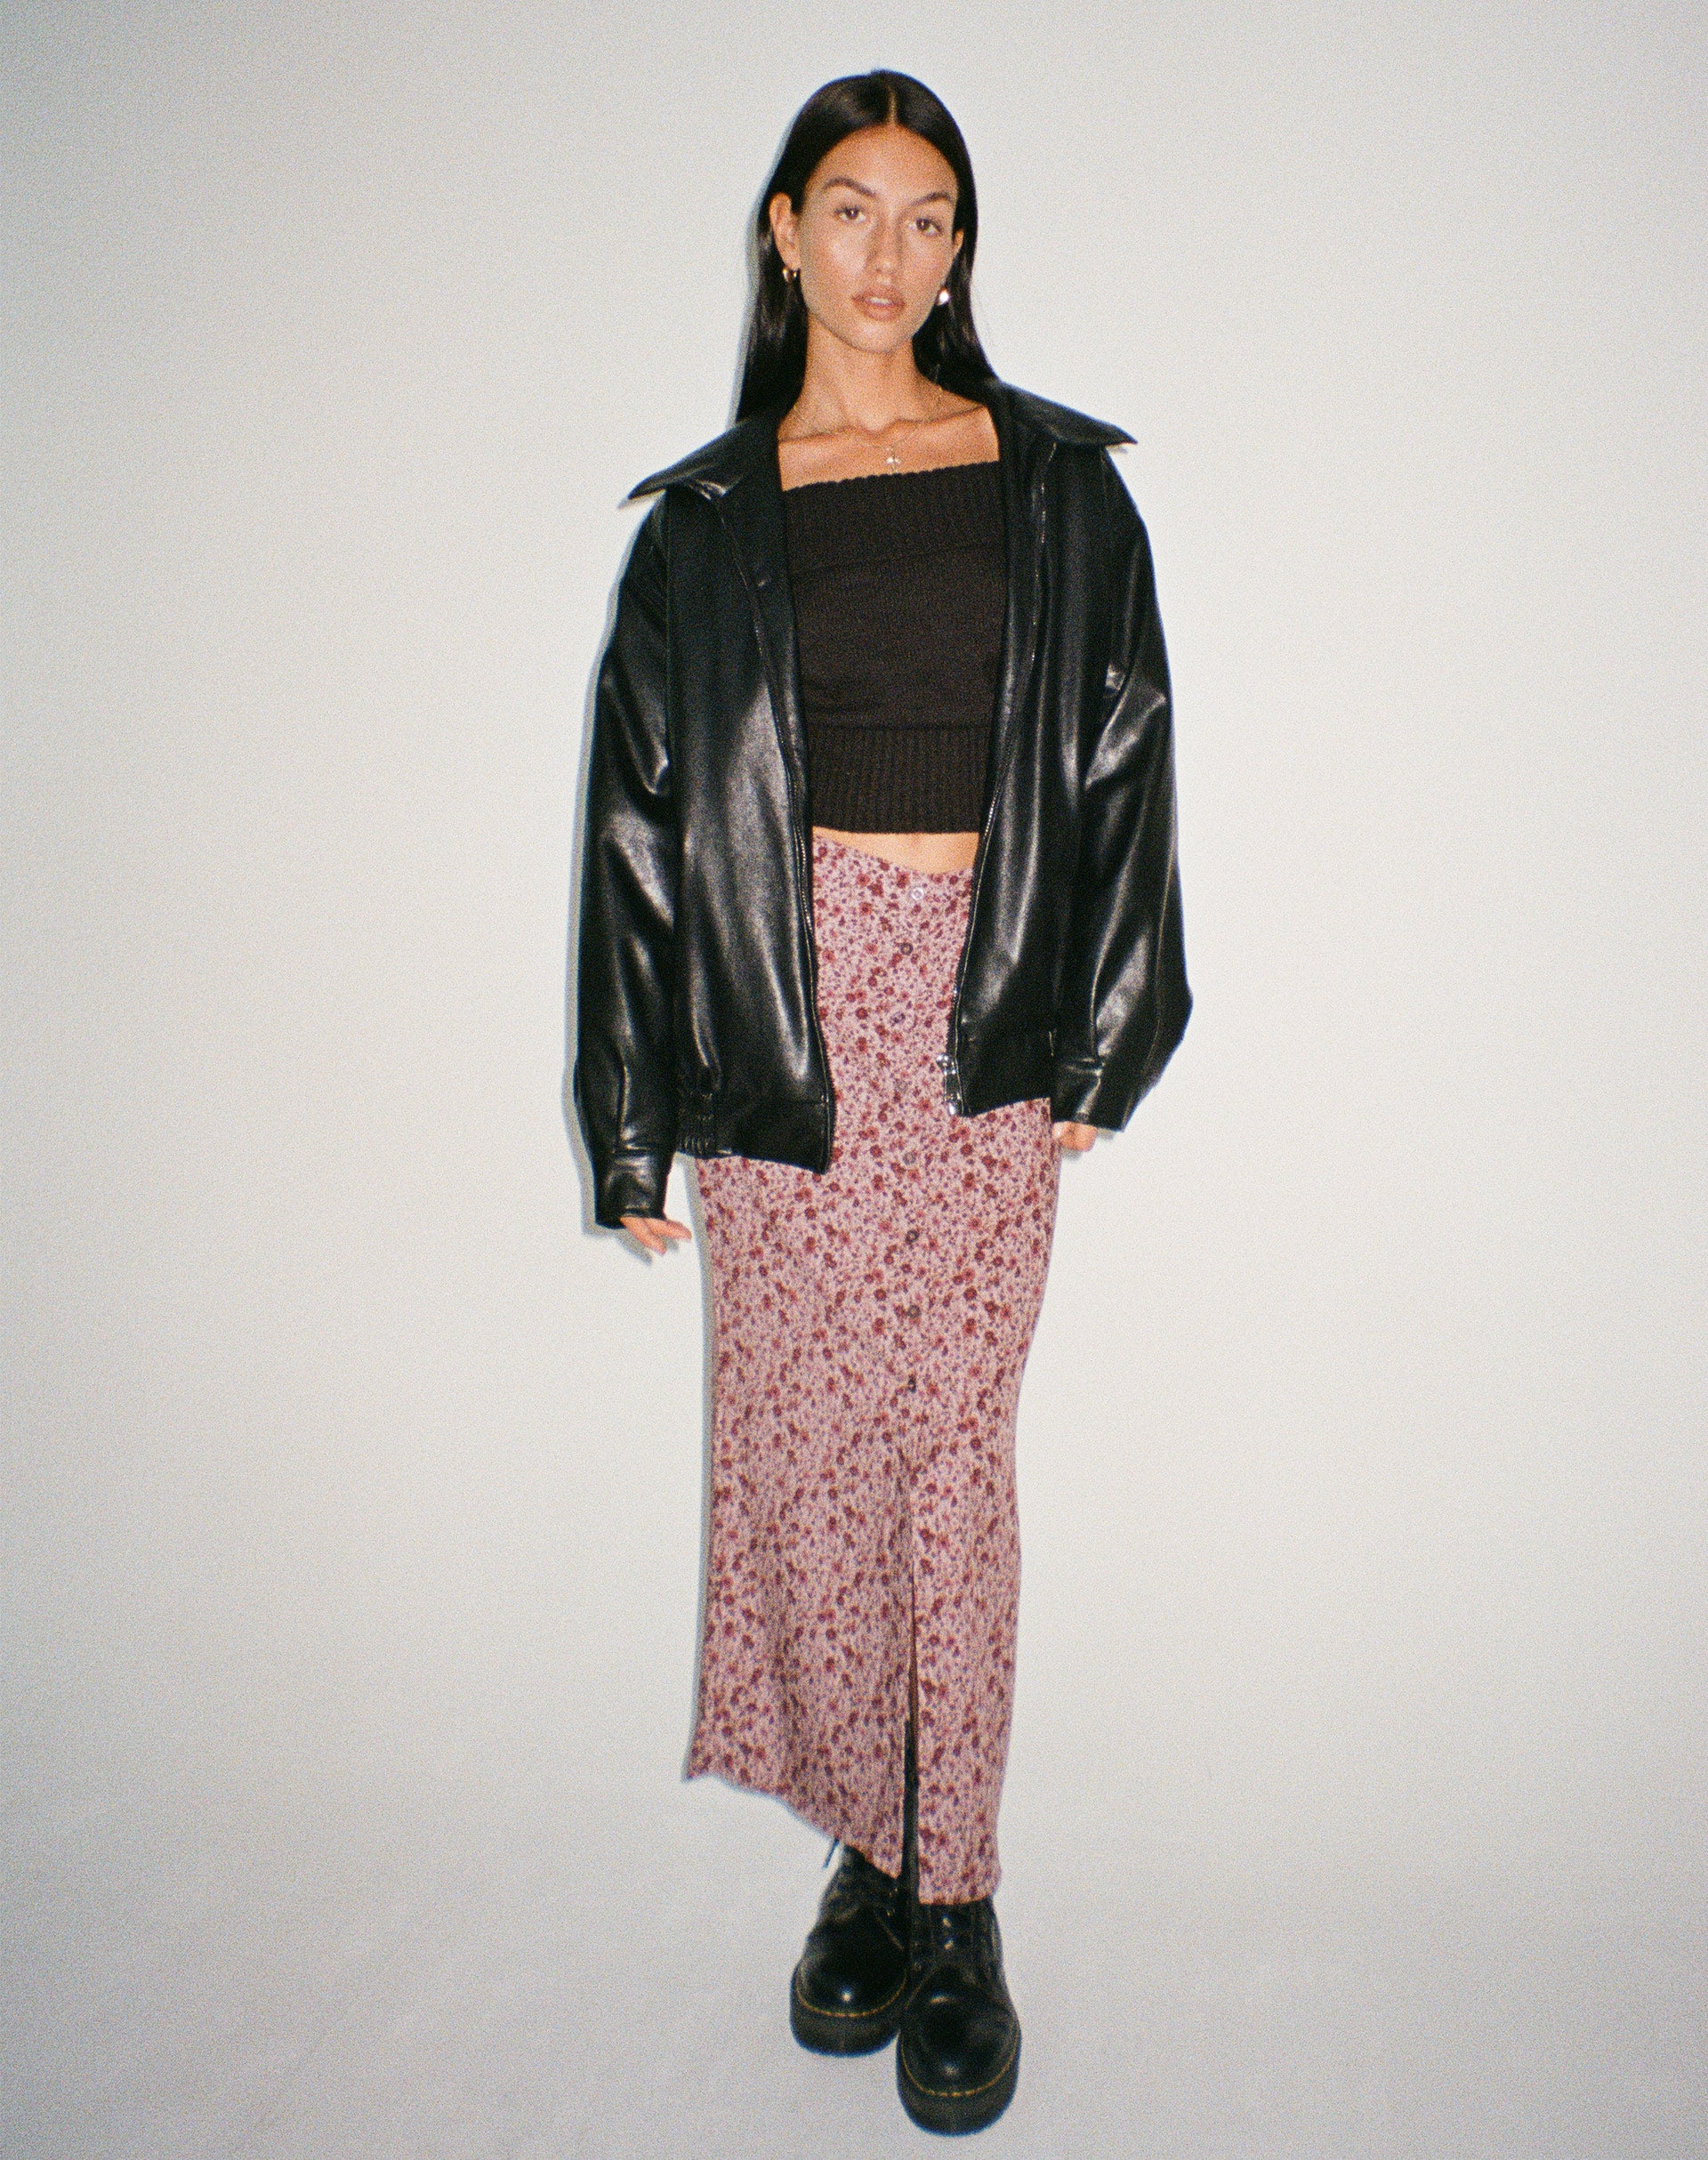 image of Relow Maxi Skirt in 90's Floral Burgundy